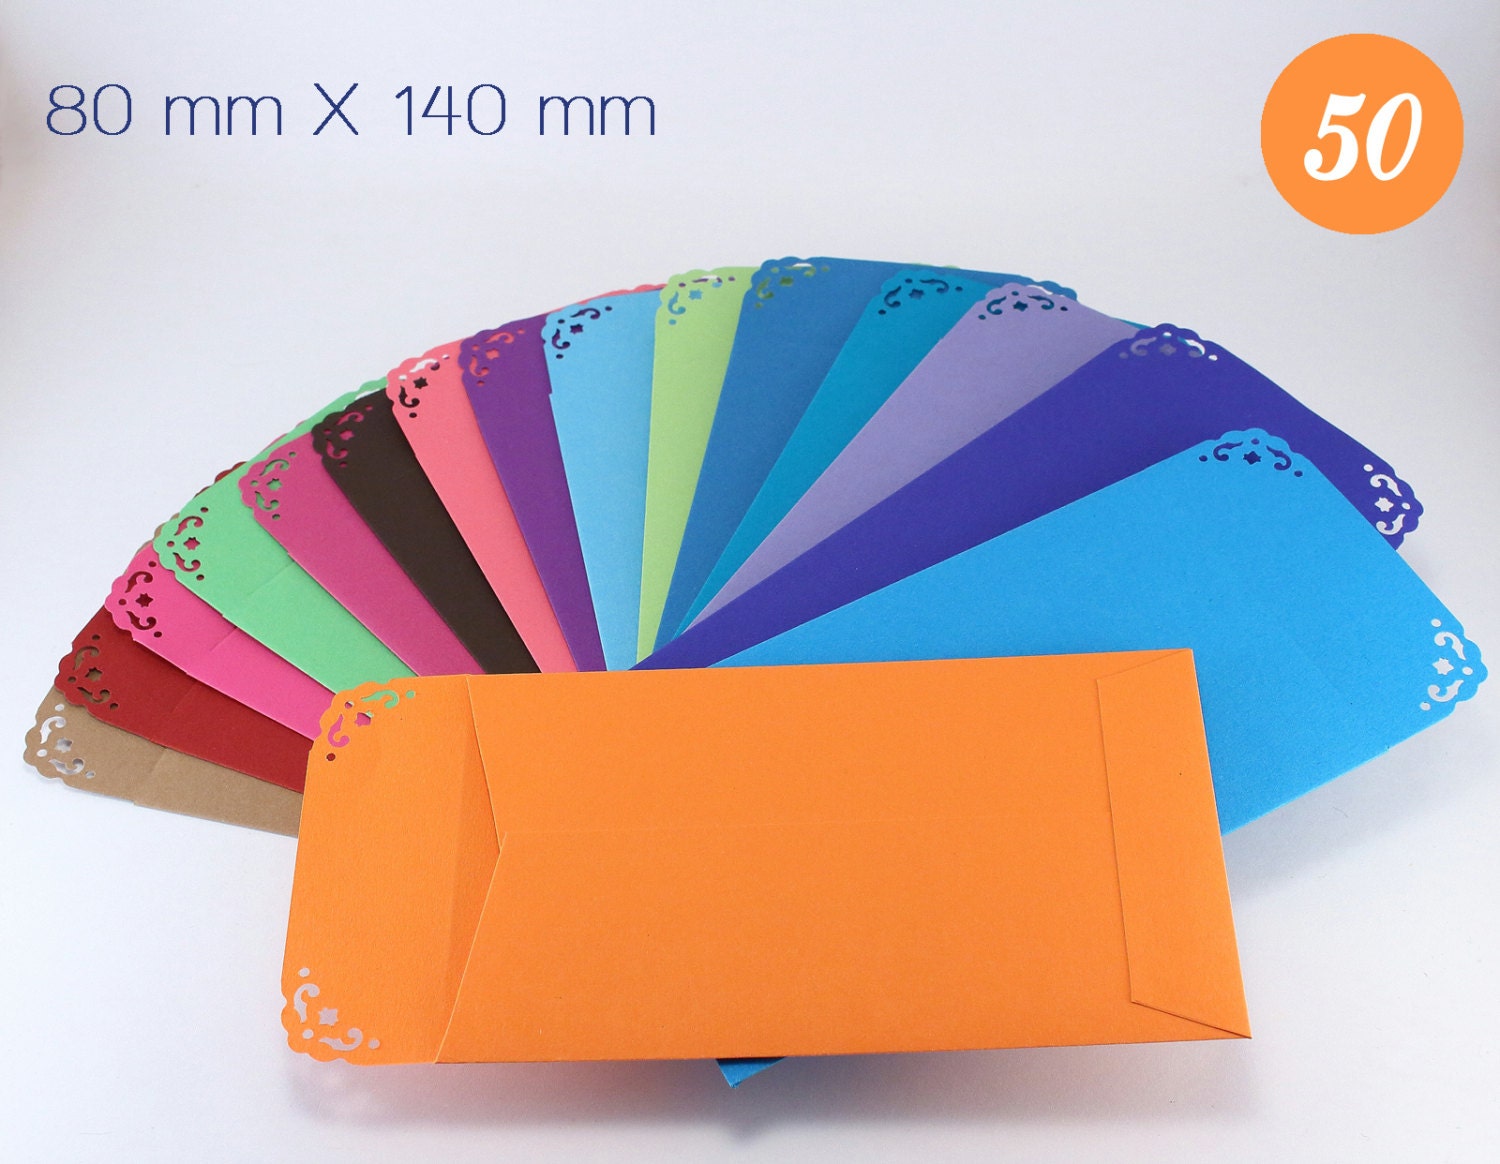 Download 50 small coin envelopes size 80mm x 140mm Color Paper